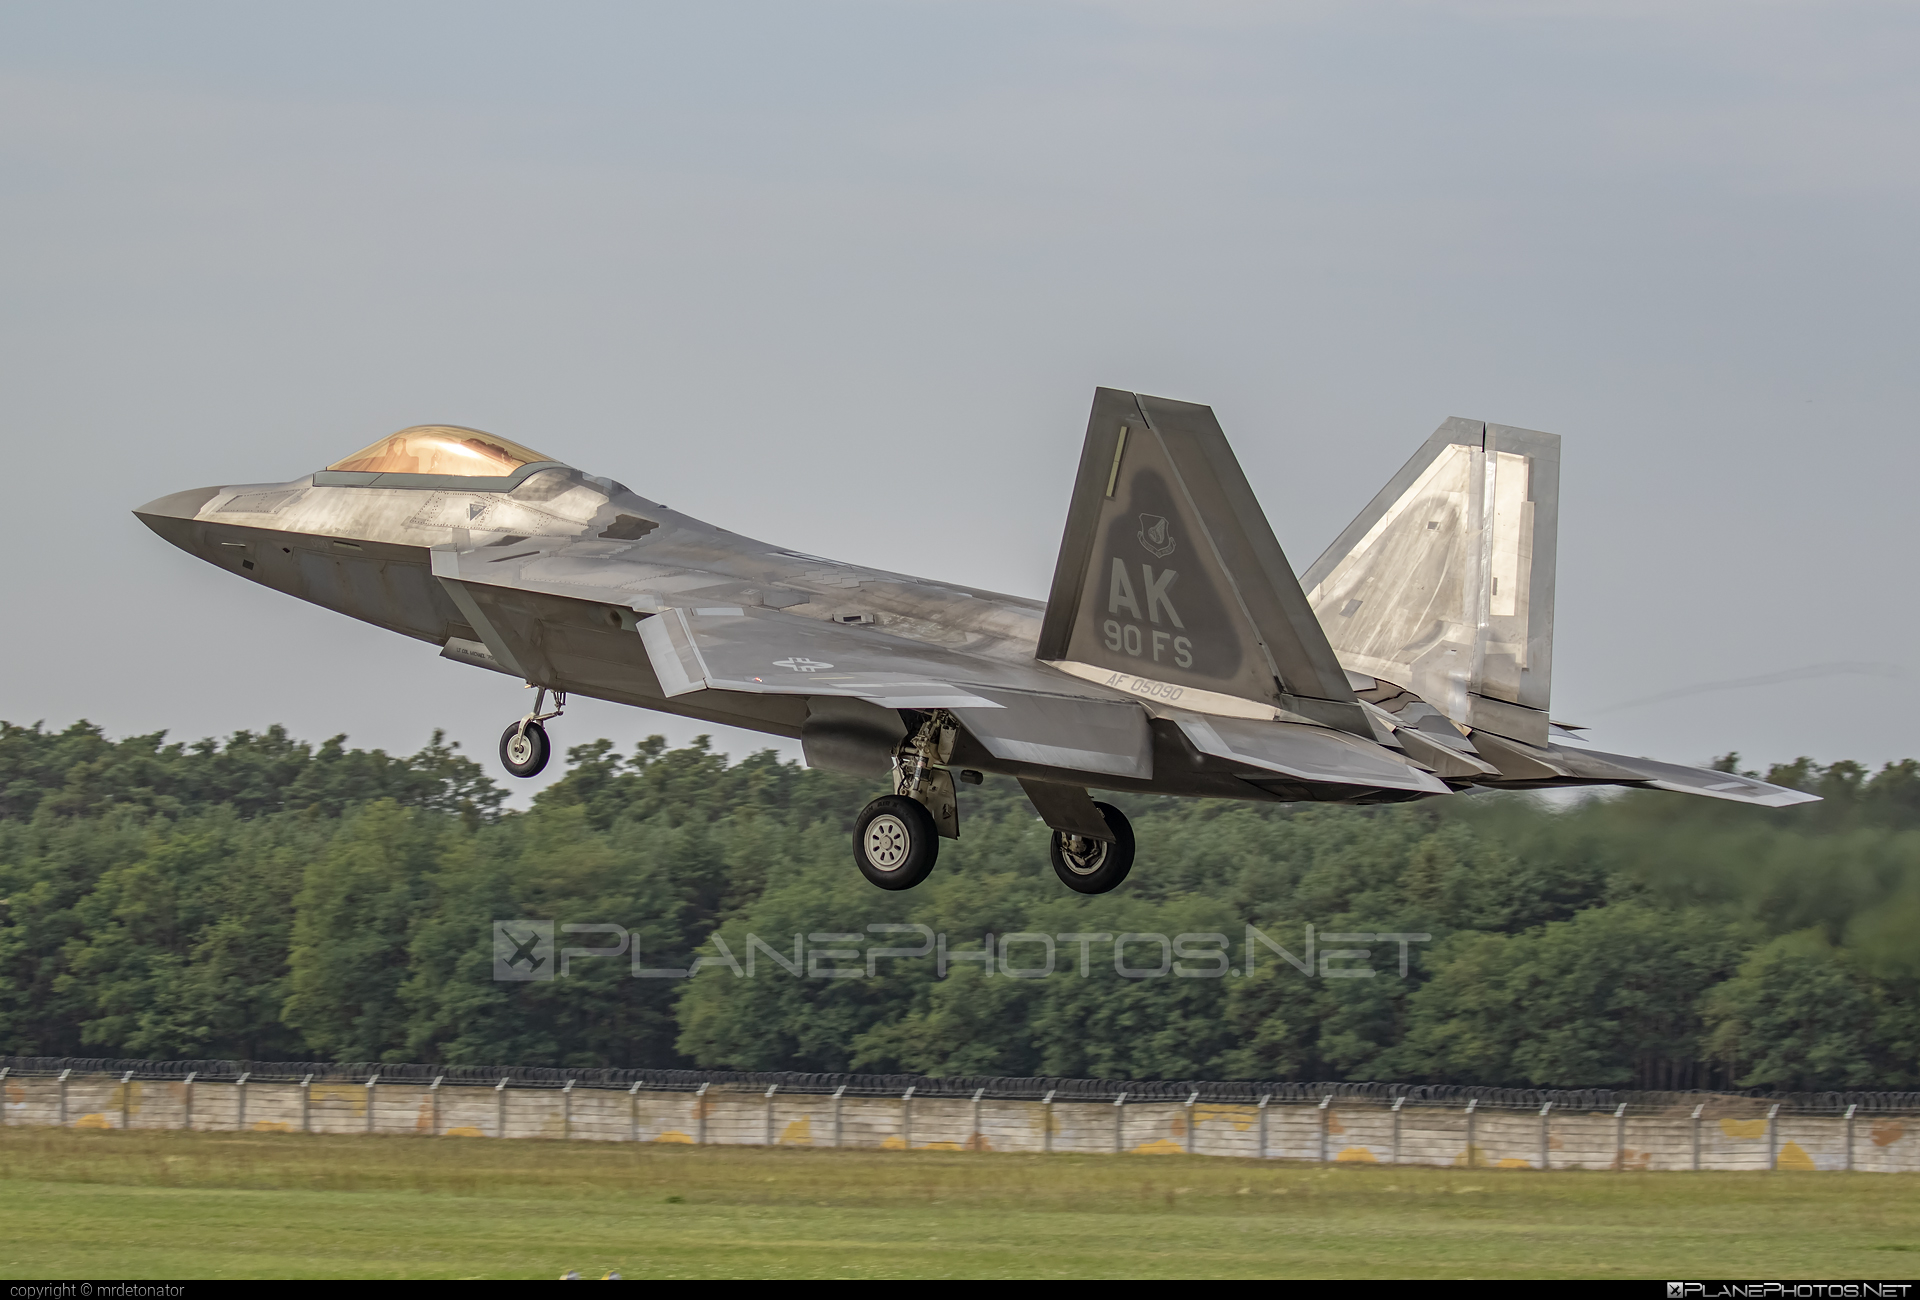 Lockheed Martin F-22A Raptor - 05-4090 operated by US Air Force (USAF) #f22 #f22a #f22aRaptor #f22raptor #lockheedMartin #lockheedMartinF22 #lockheedMartinRaptor #raptor #siaf2022 #usaf #usairforce